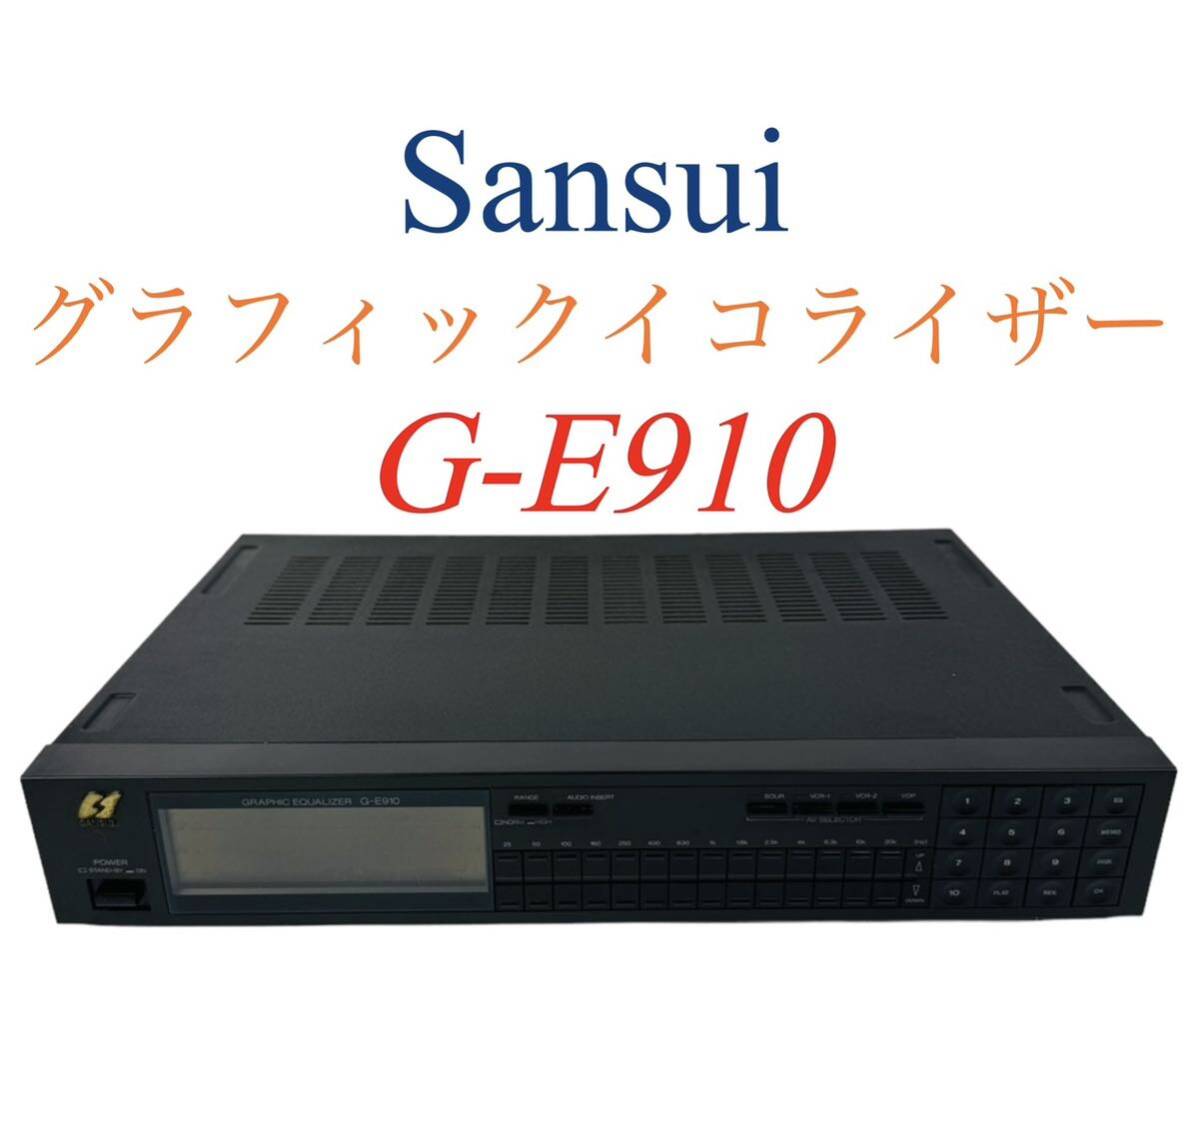 SANSUI landscape electric Sansui spare na display attaching 14 band Graphic Equalizer graphic equalizer G-E910